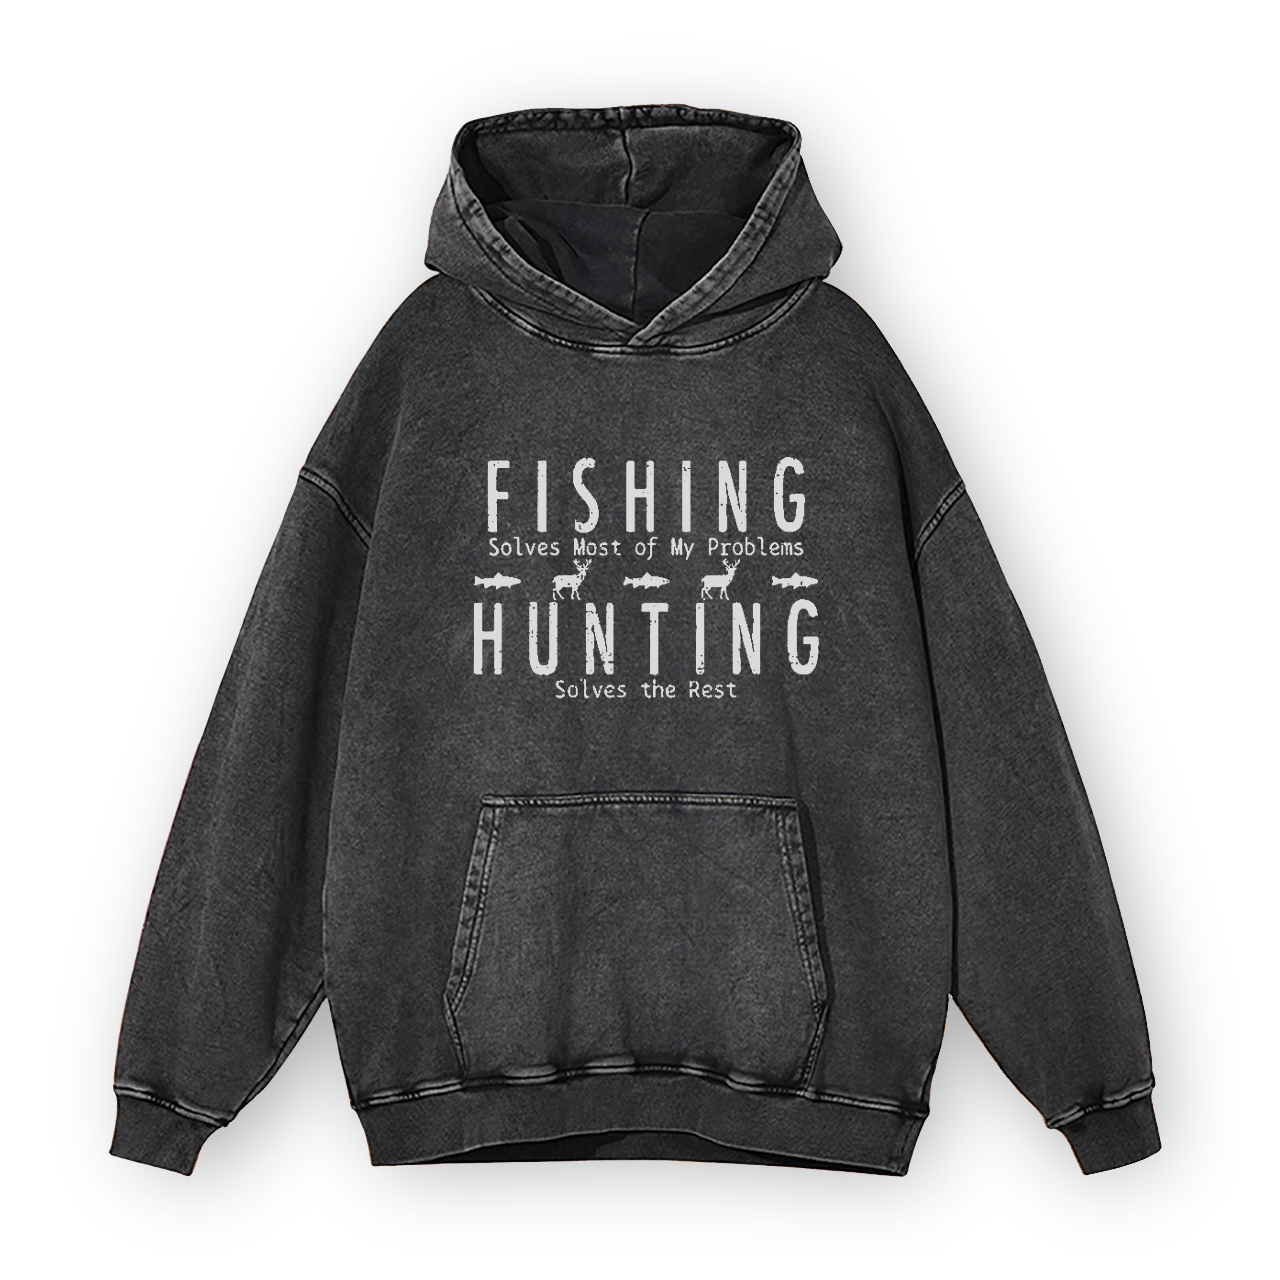 Fishing Hunting Solves Most Of My Problems Solves The Rest Garment-Dye Hoodies